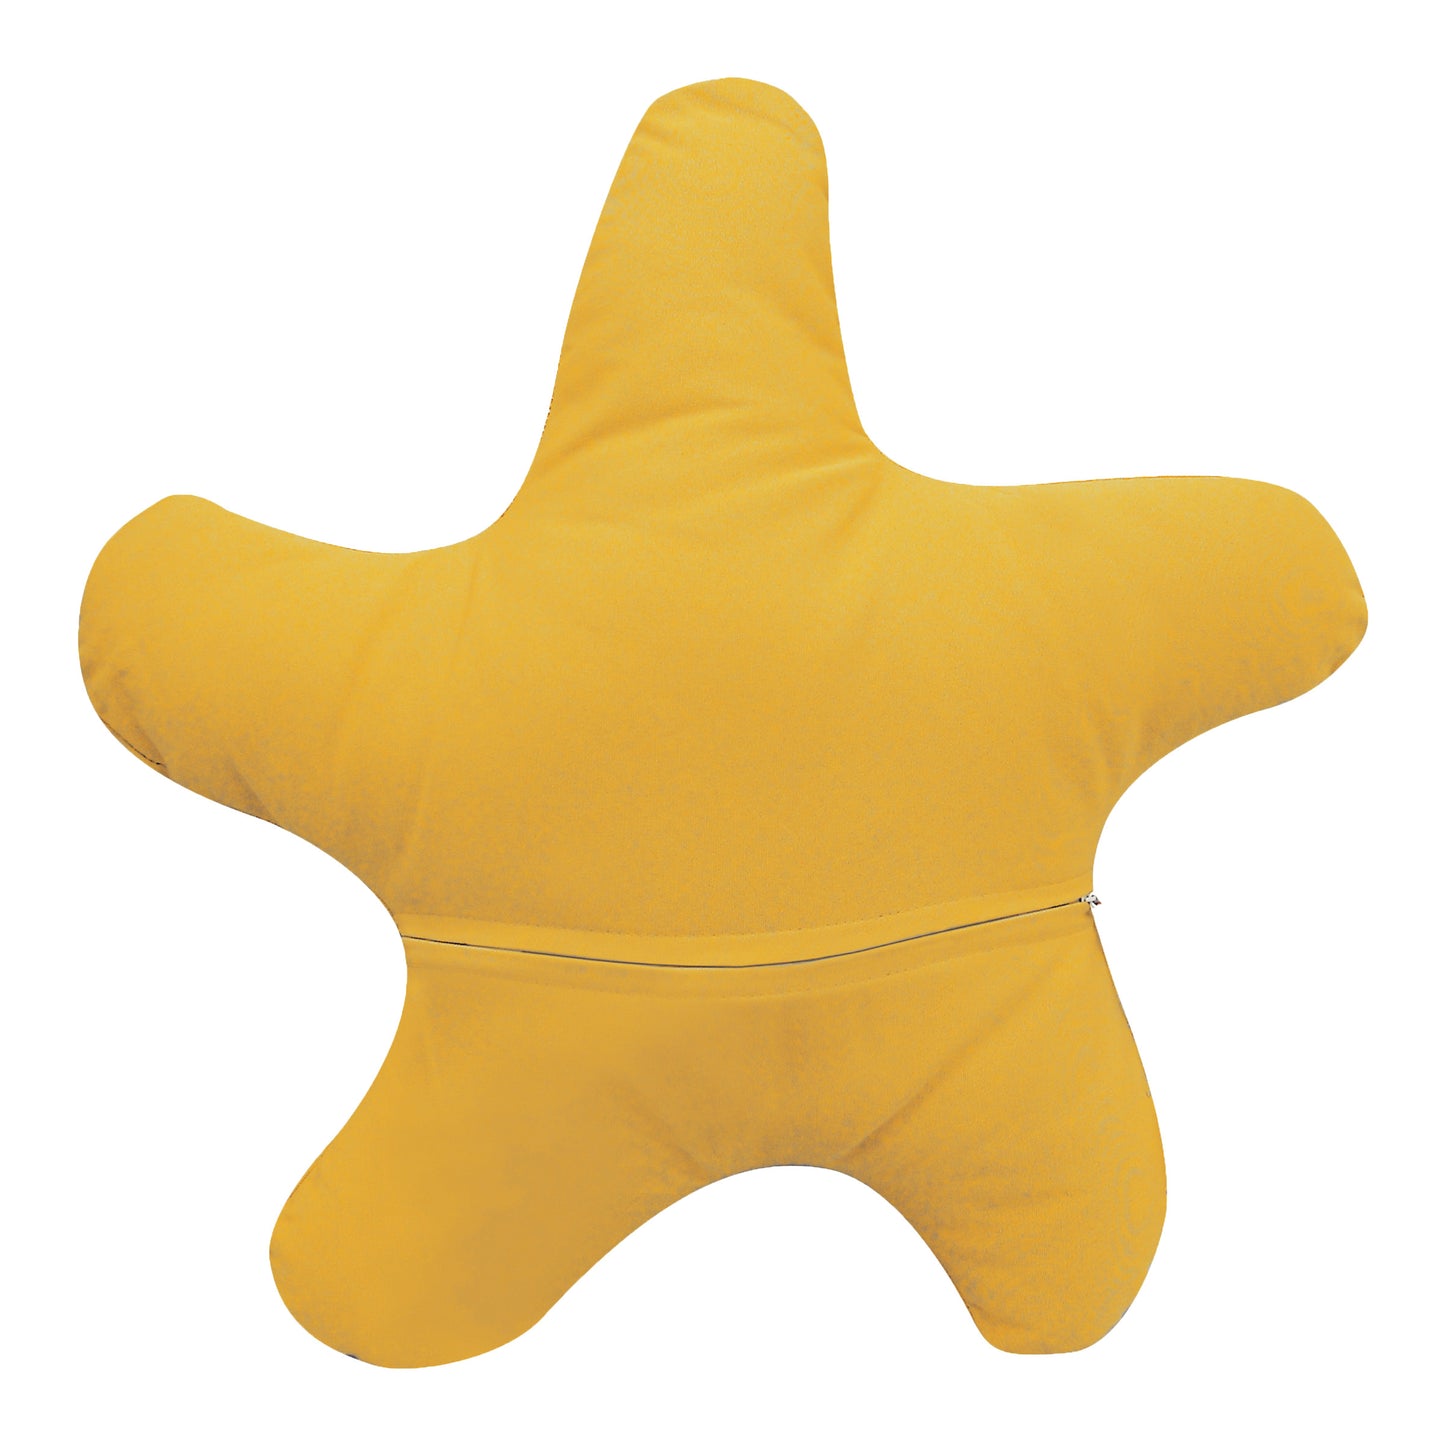 Solid marigold colored fabric; back of the Marigold Shaped Sea Star Fish pillow.